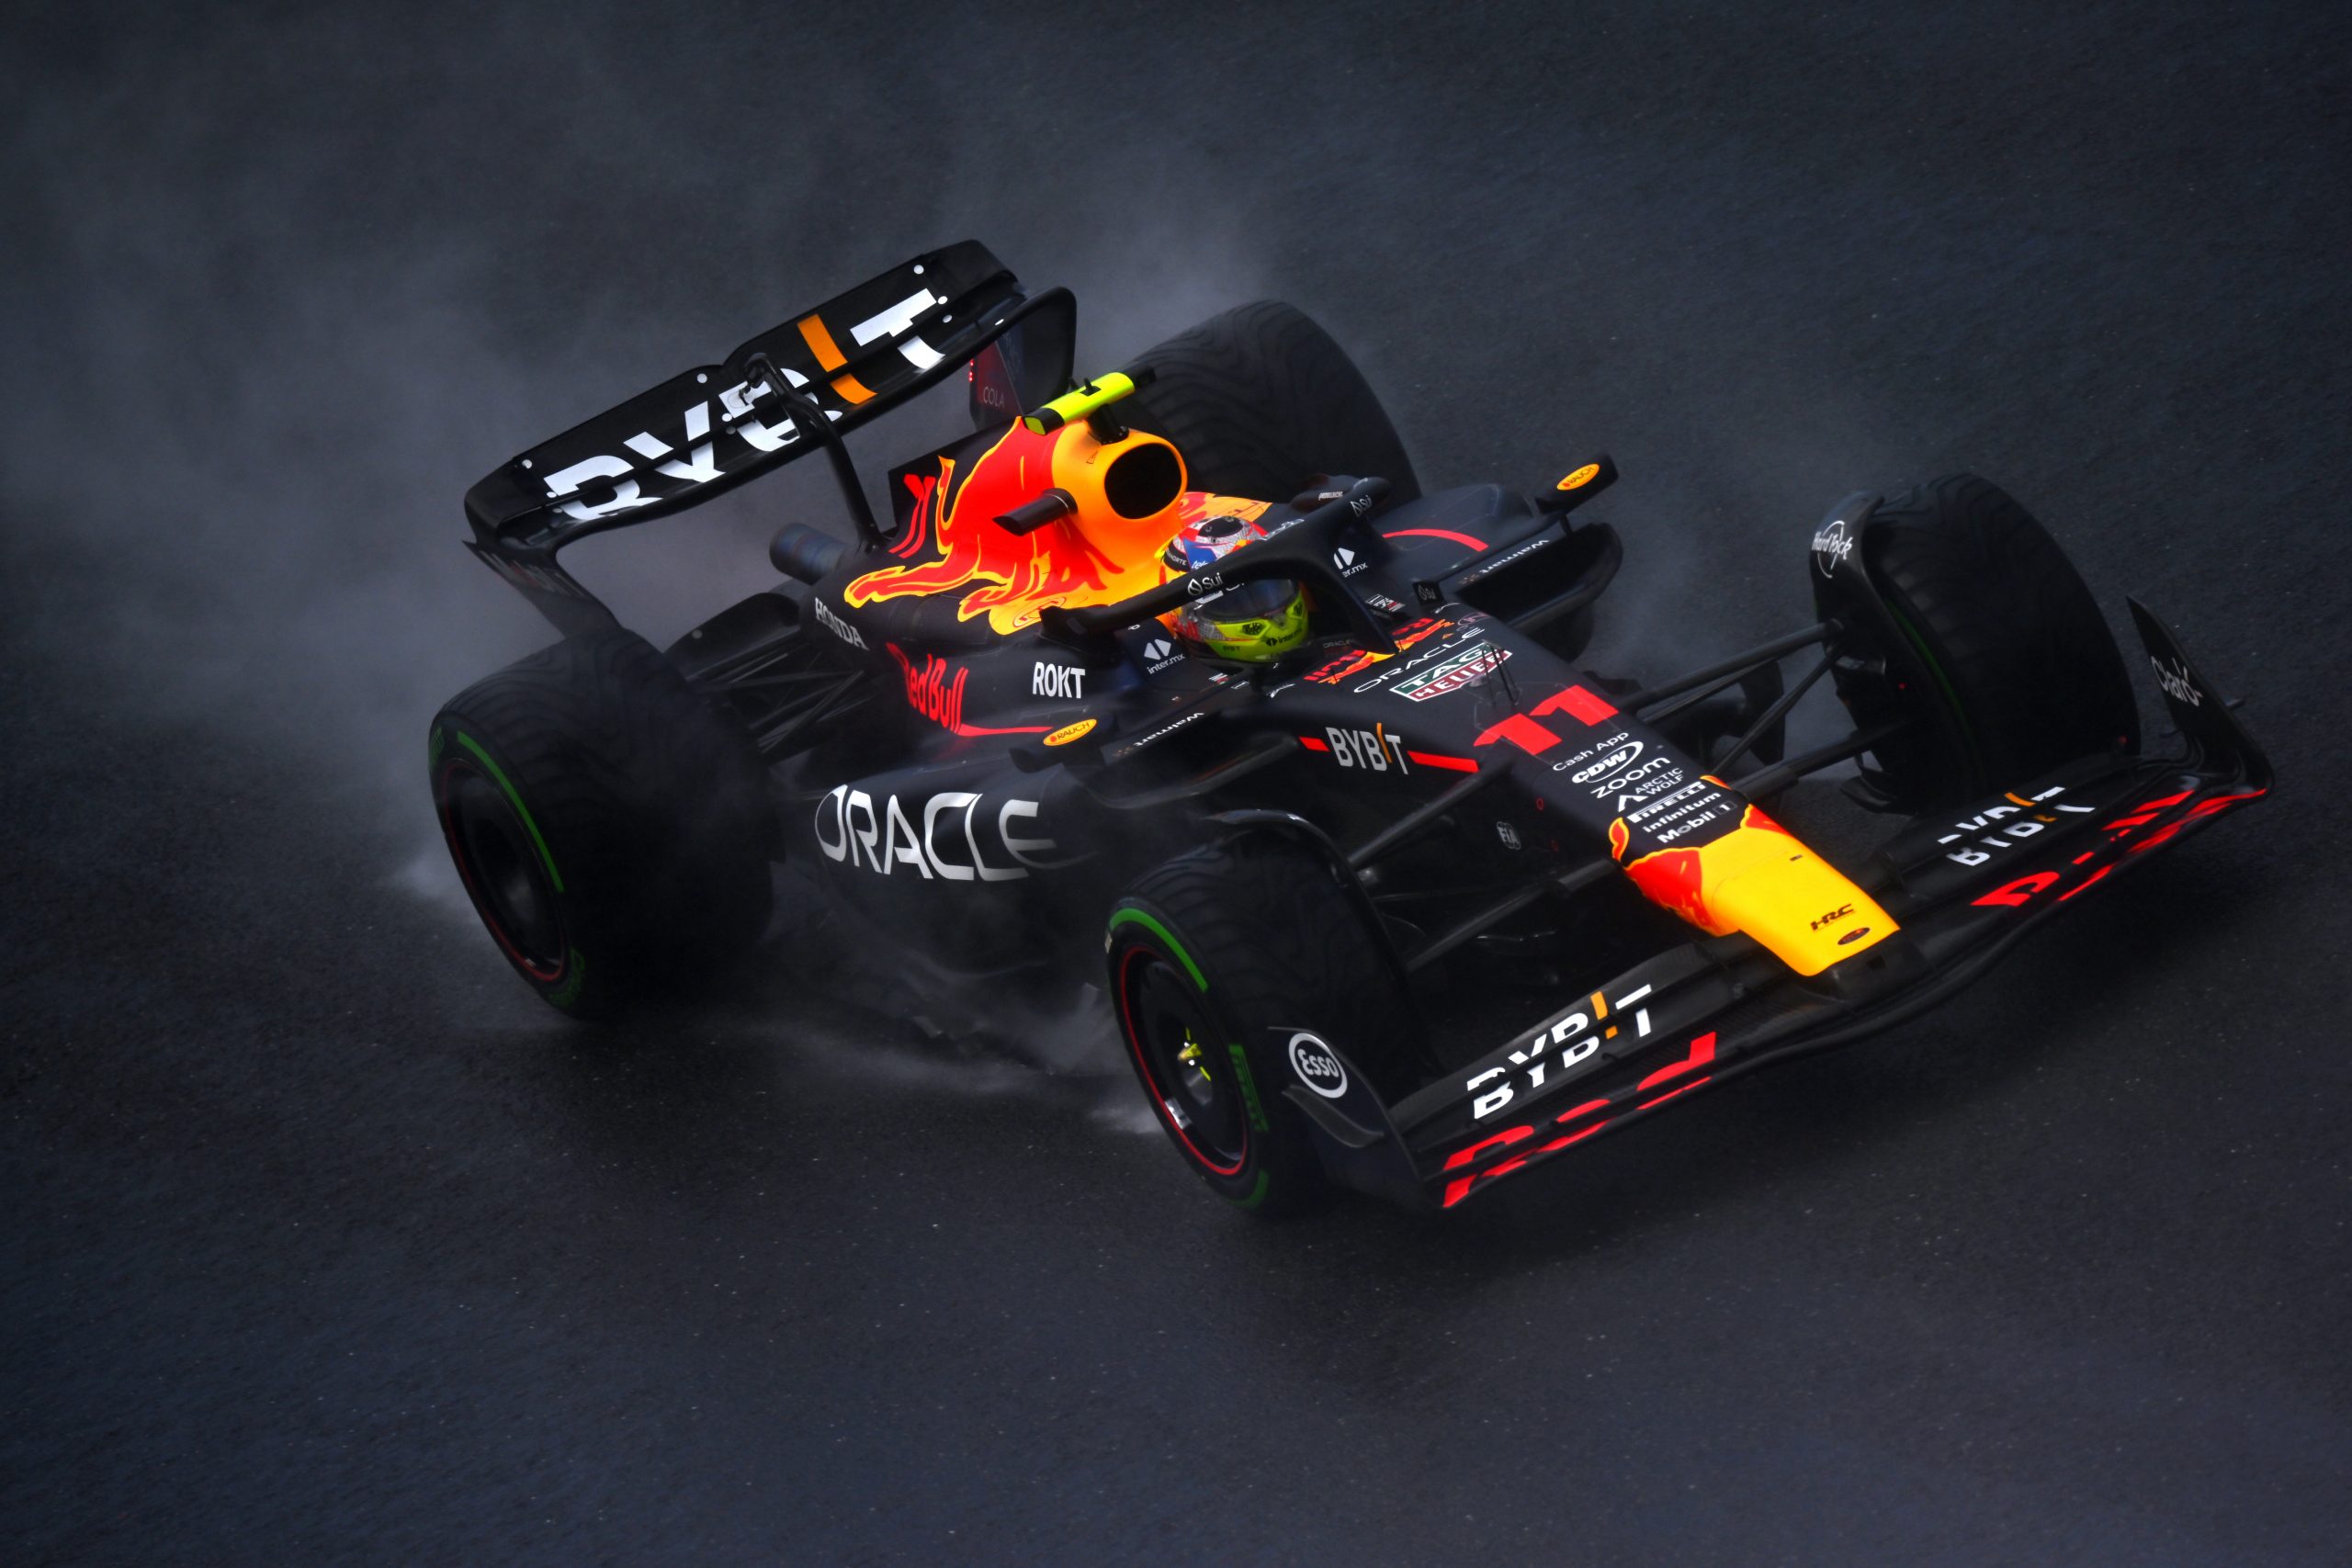 Sergio Perez (11) runs laps in the wet in his Red Bull during the Sprint Shoot Out during the Belgium Grand Prix weekend